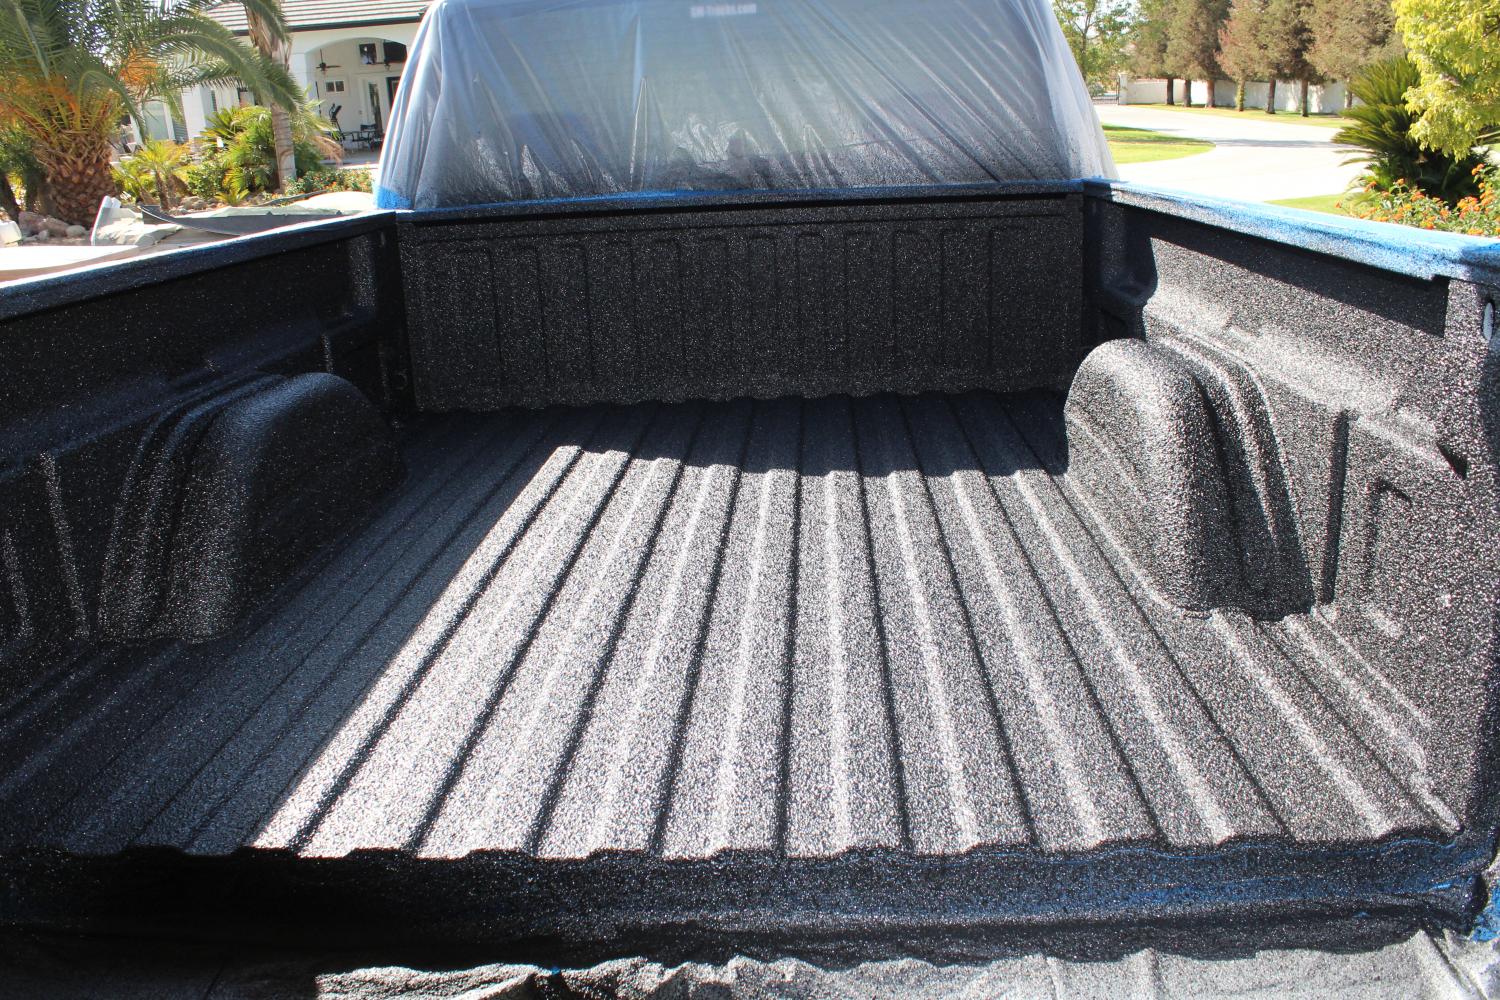 Product Test - Scorpion Coating Bed Liner